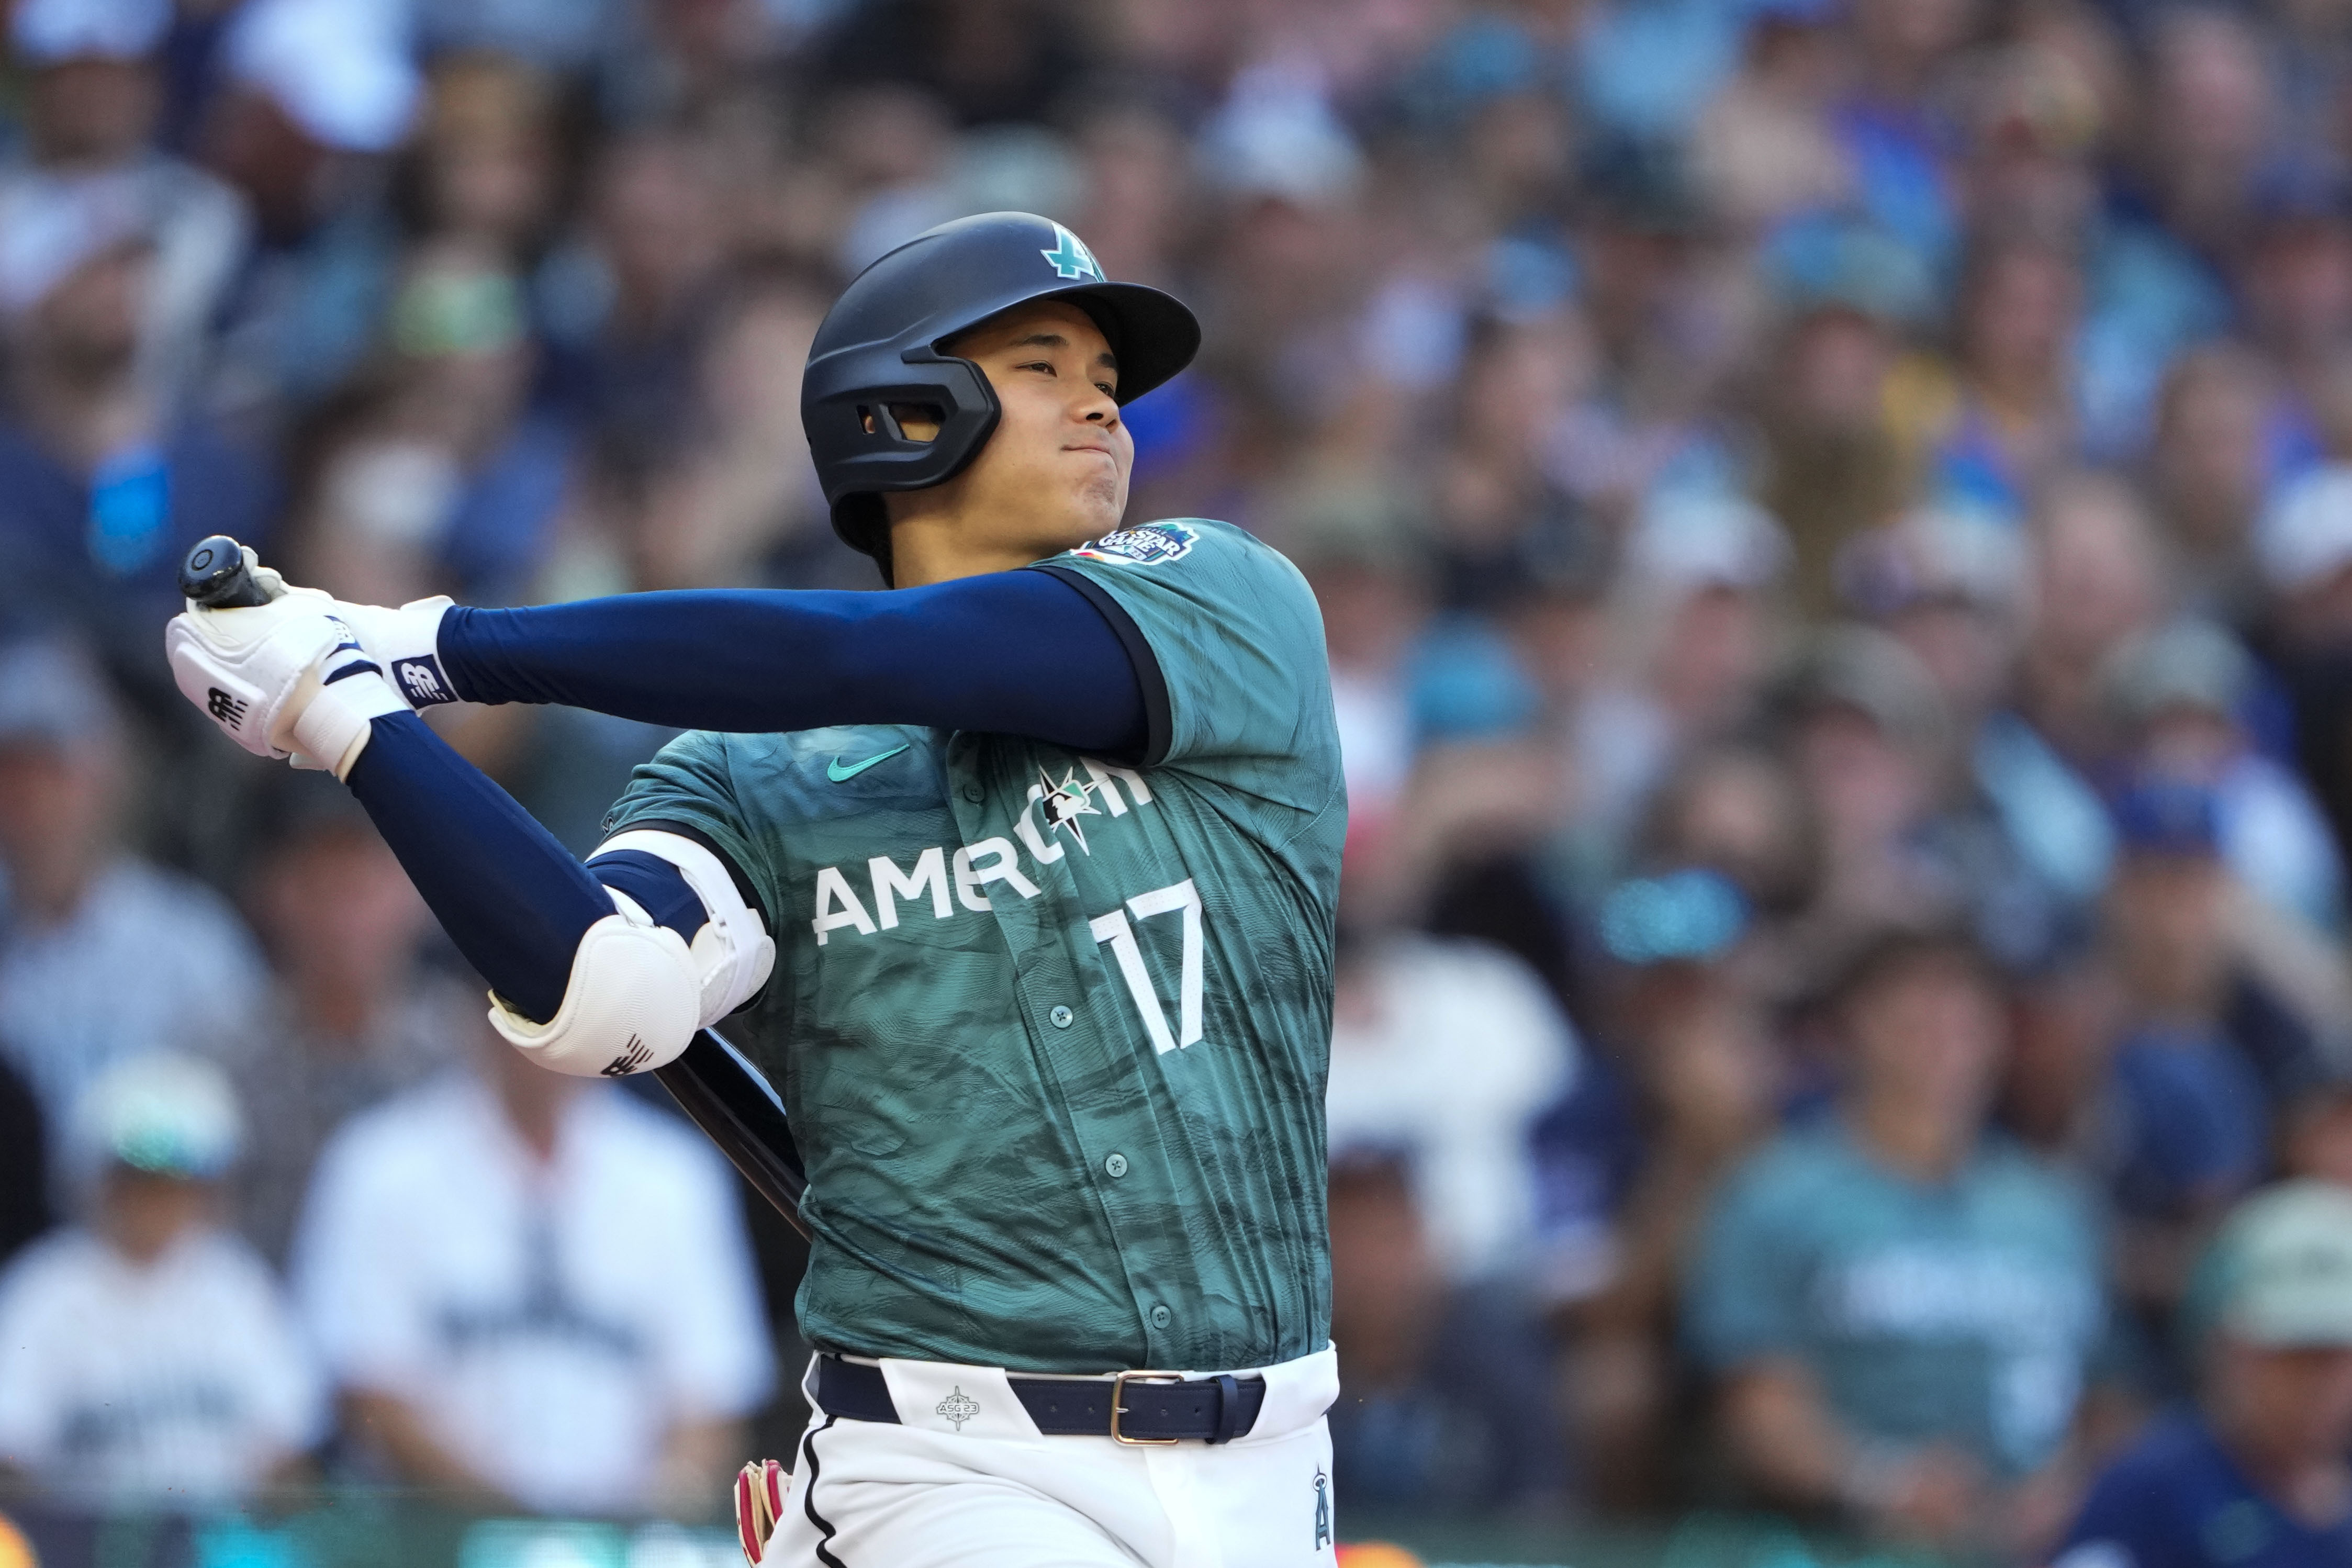 Shohei Ohtani hit with 'Come to Seattle' chants by Mariners fans at  All-Star Game